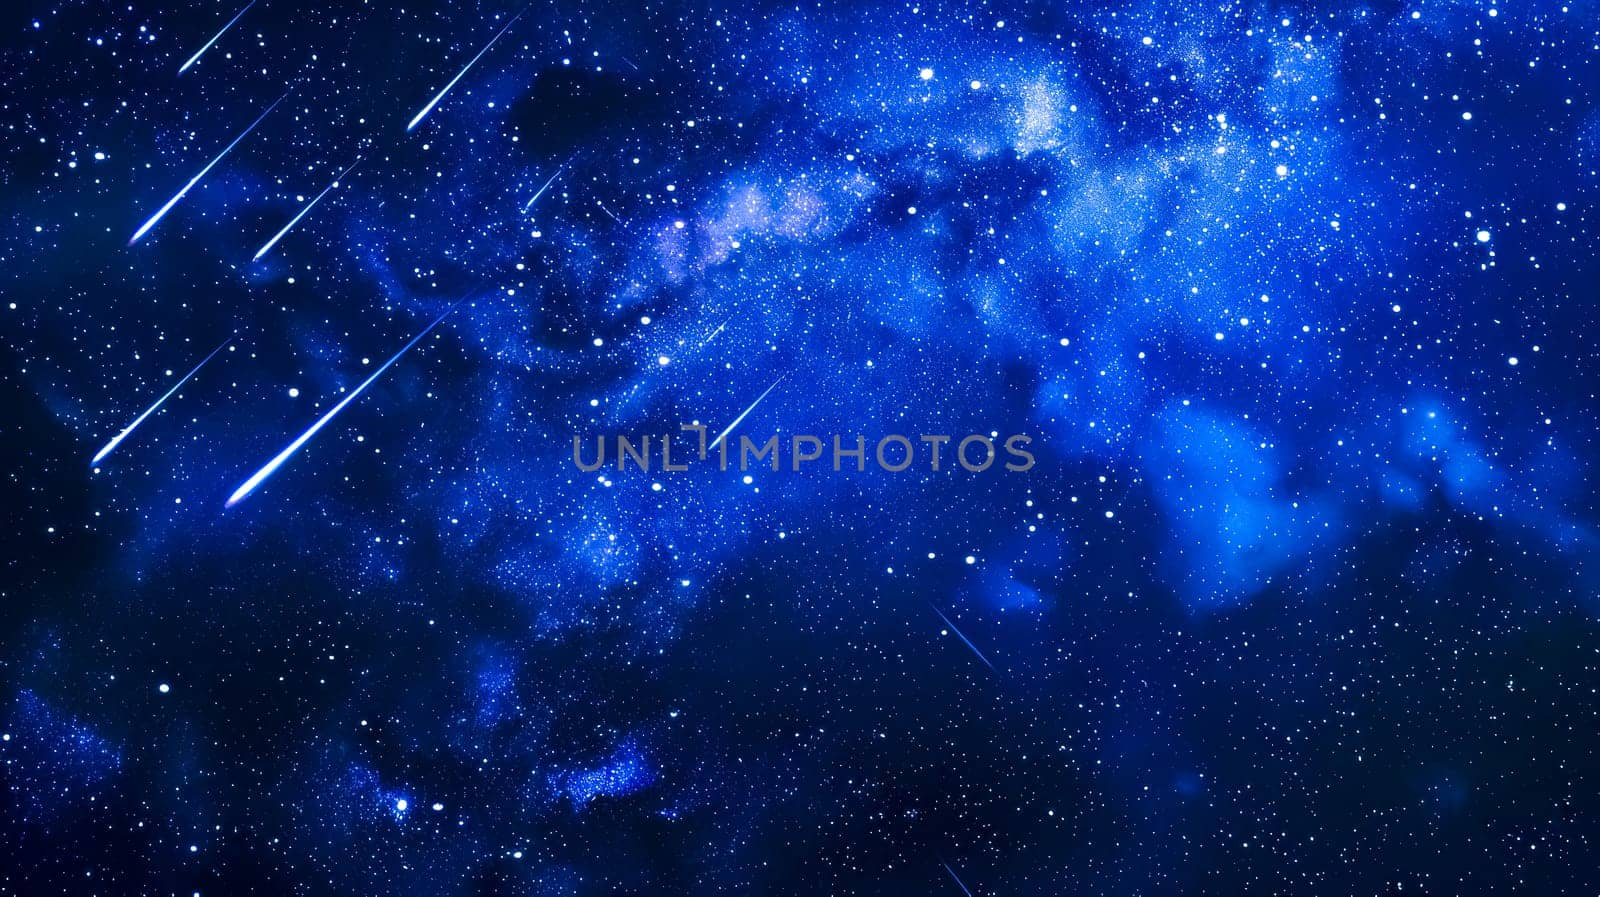 Starry night sky with meteor shower by Edophoto